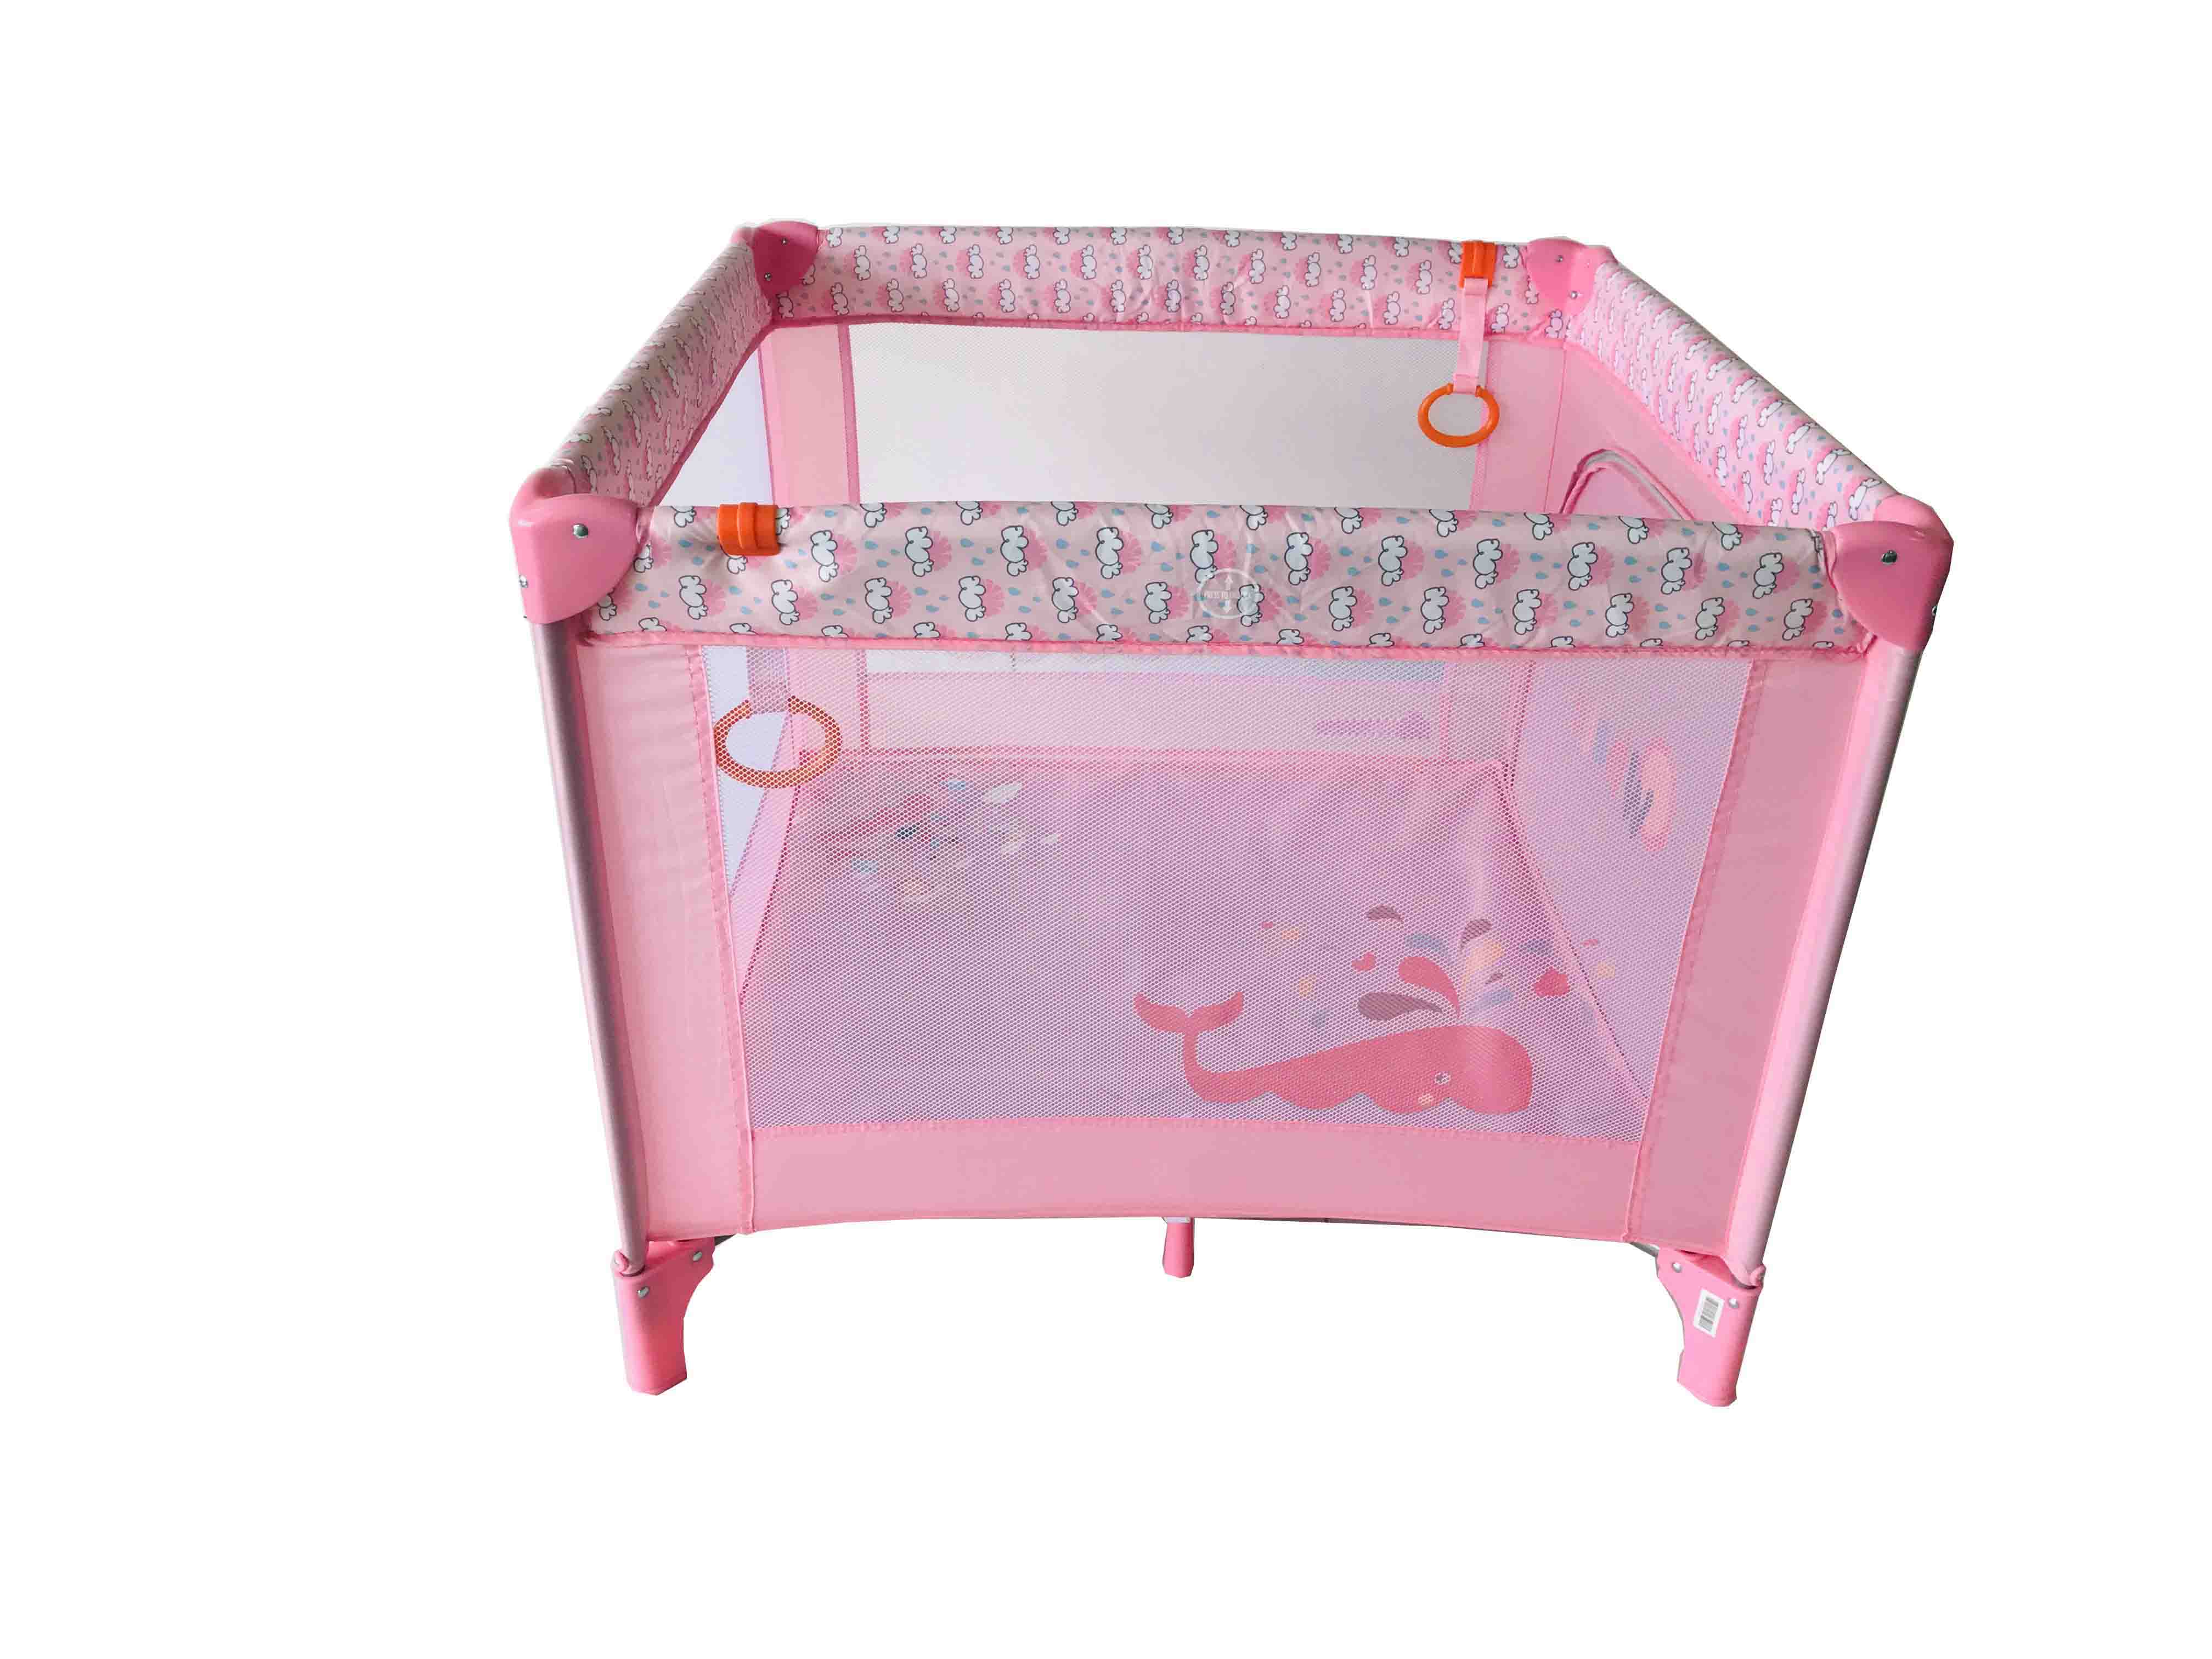 pink square playpen large baby fence play yard Factory